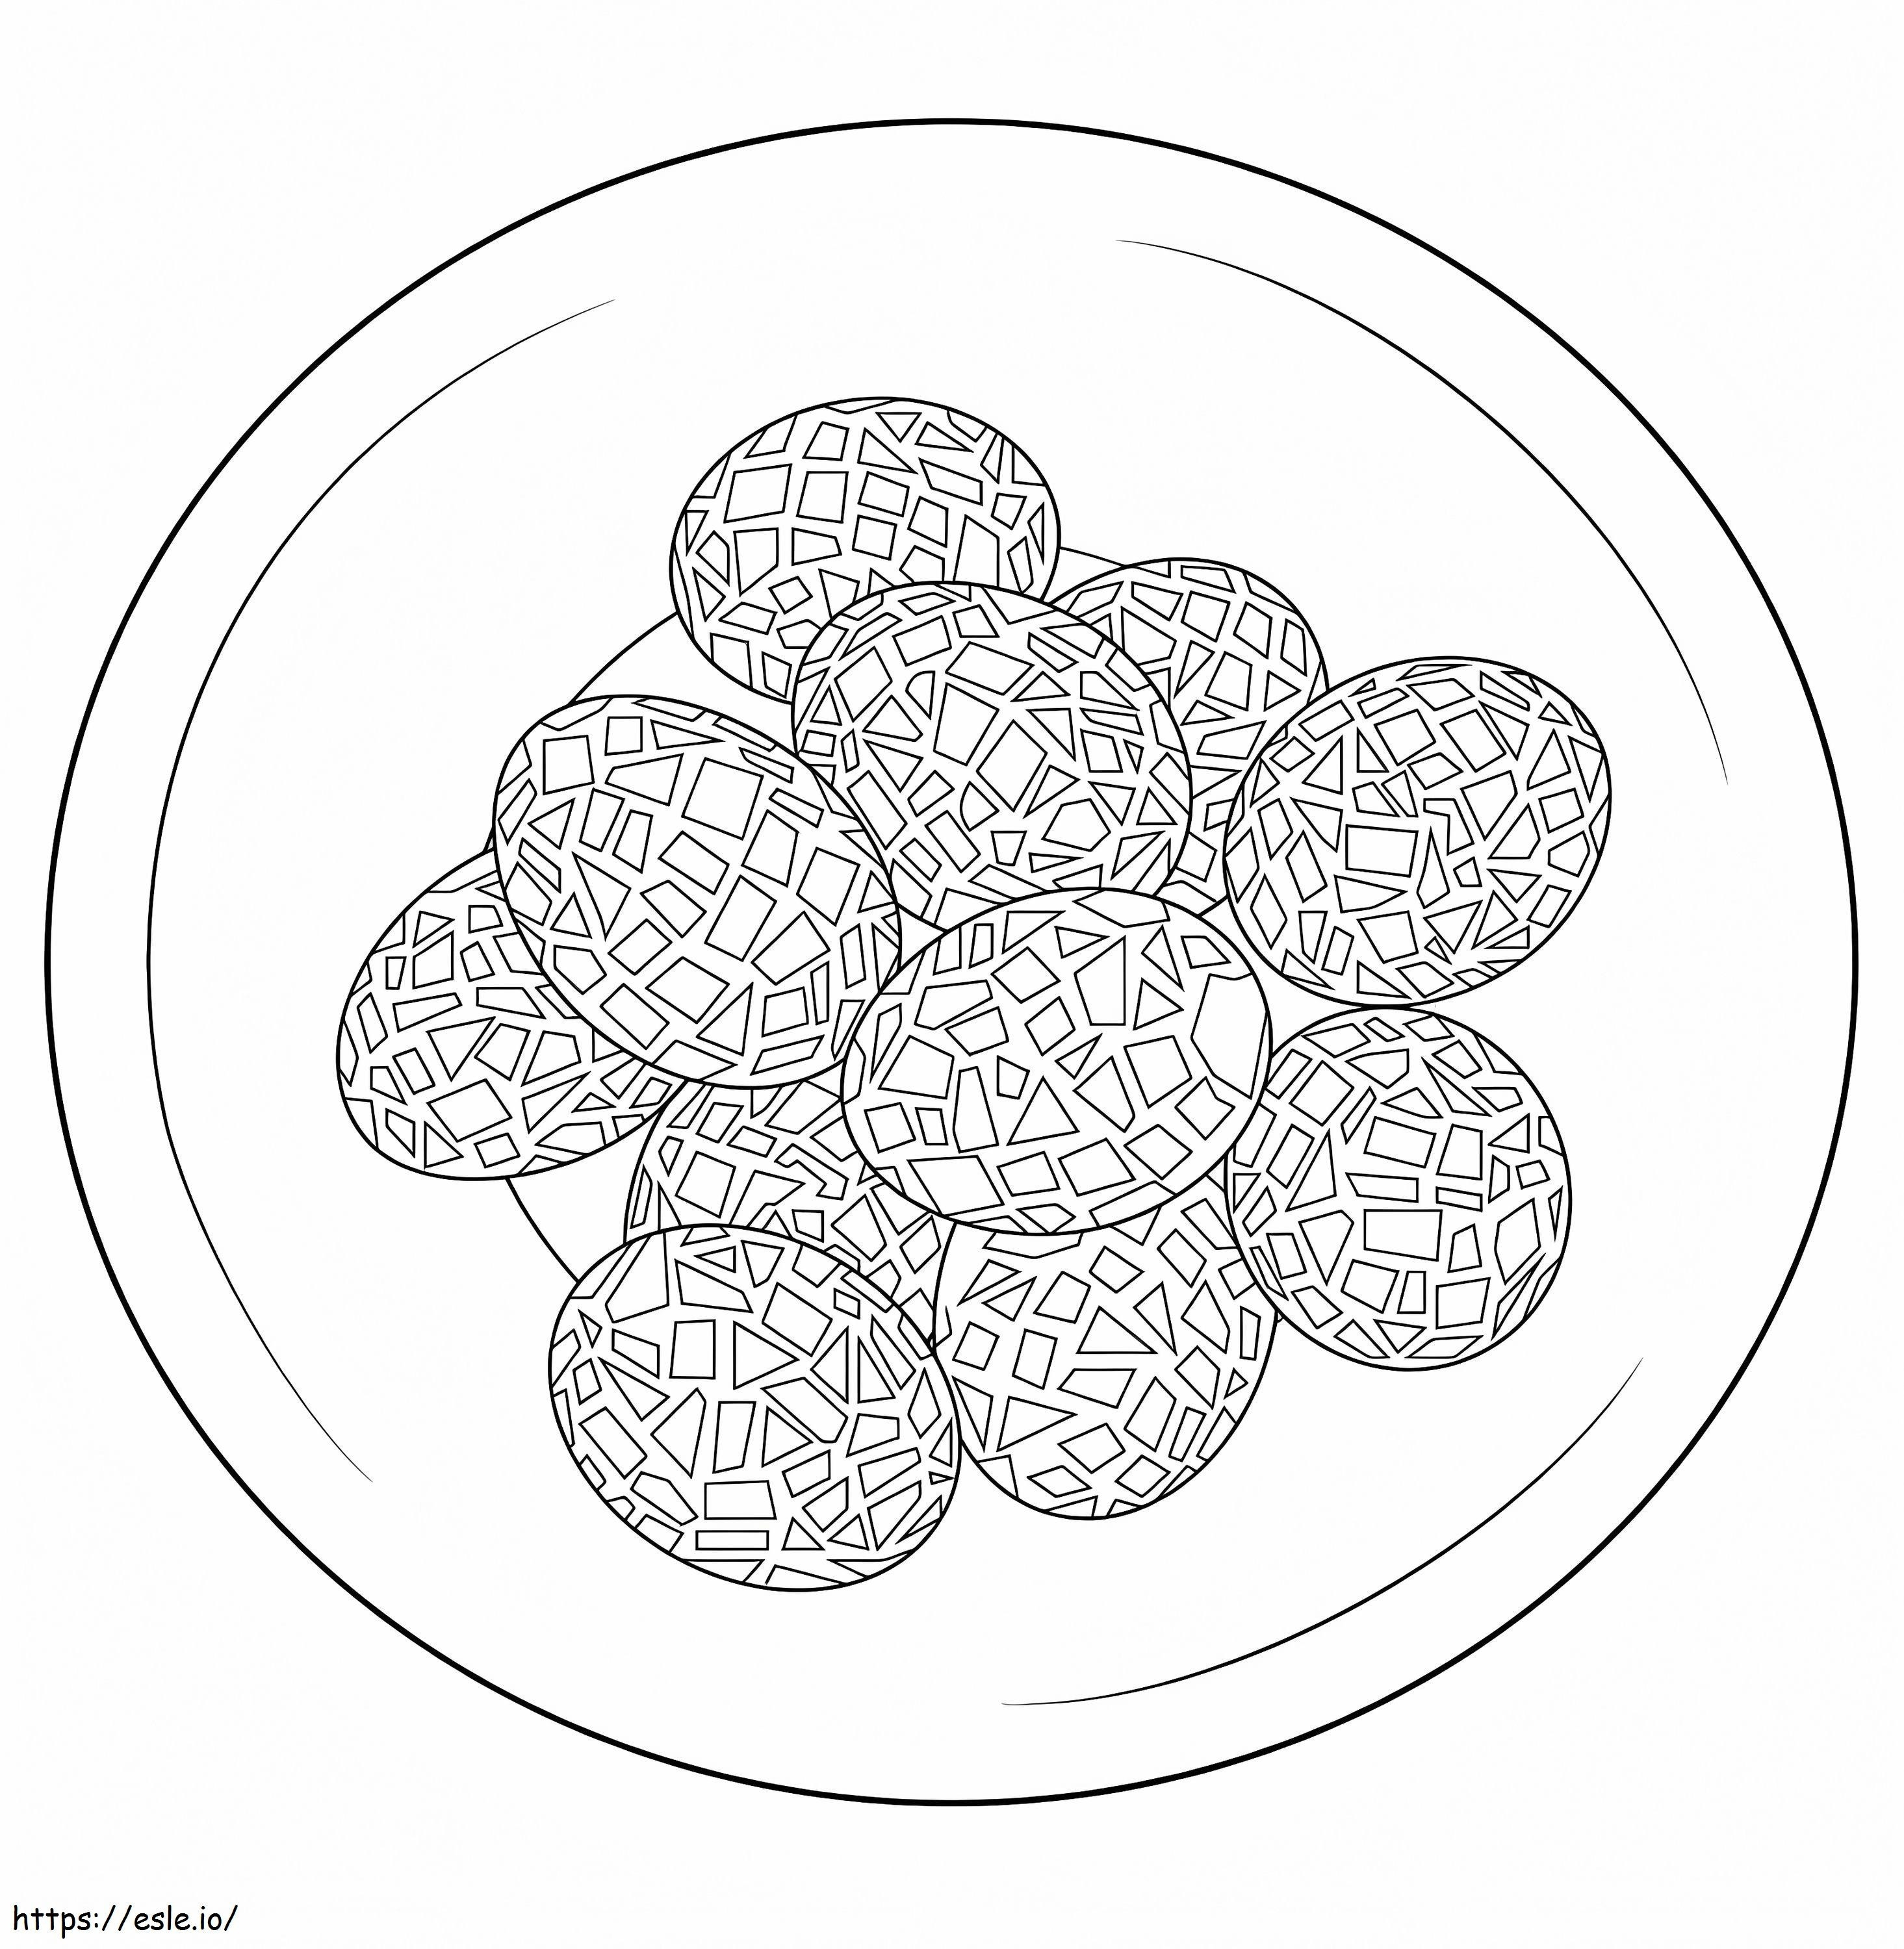 Mosaic Eggs coloring page